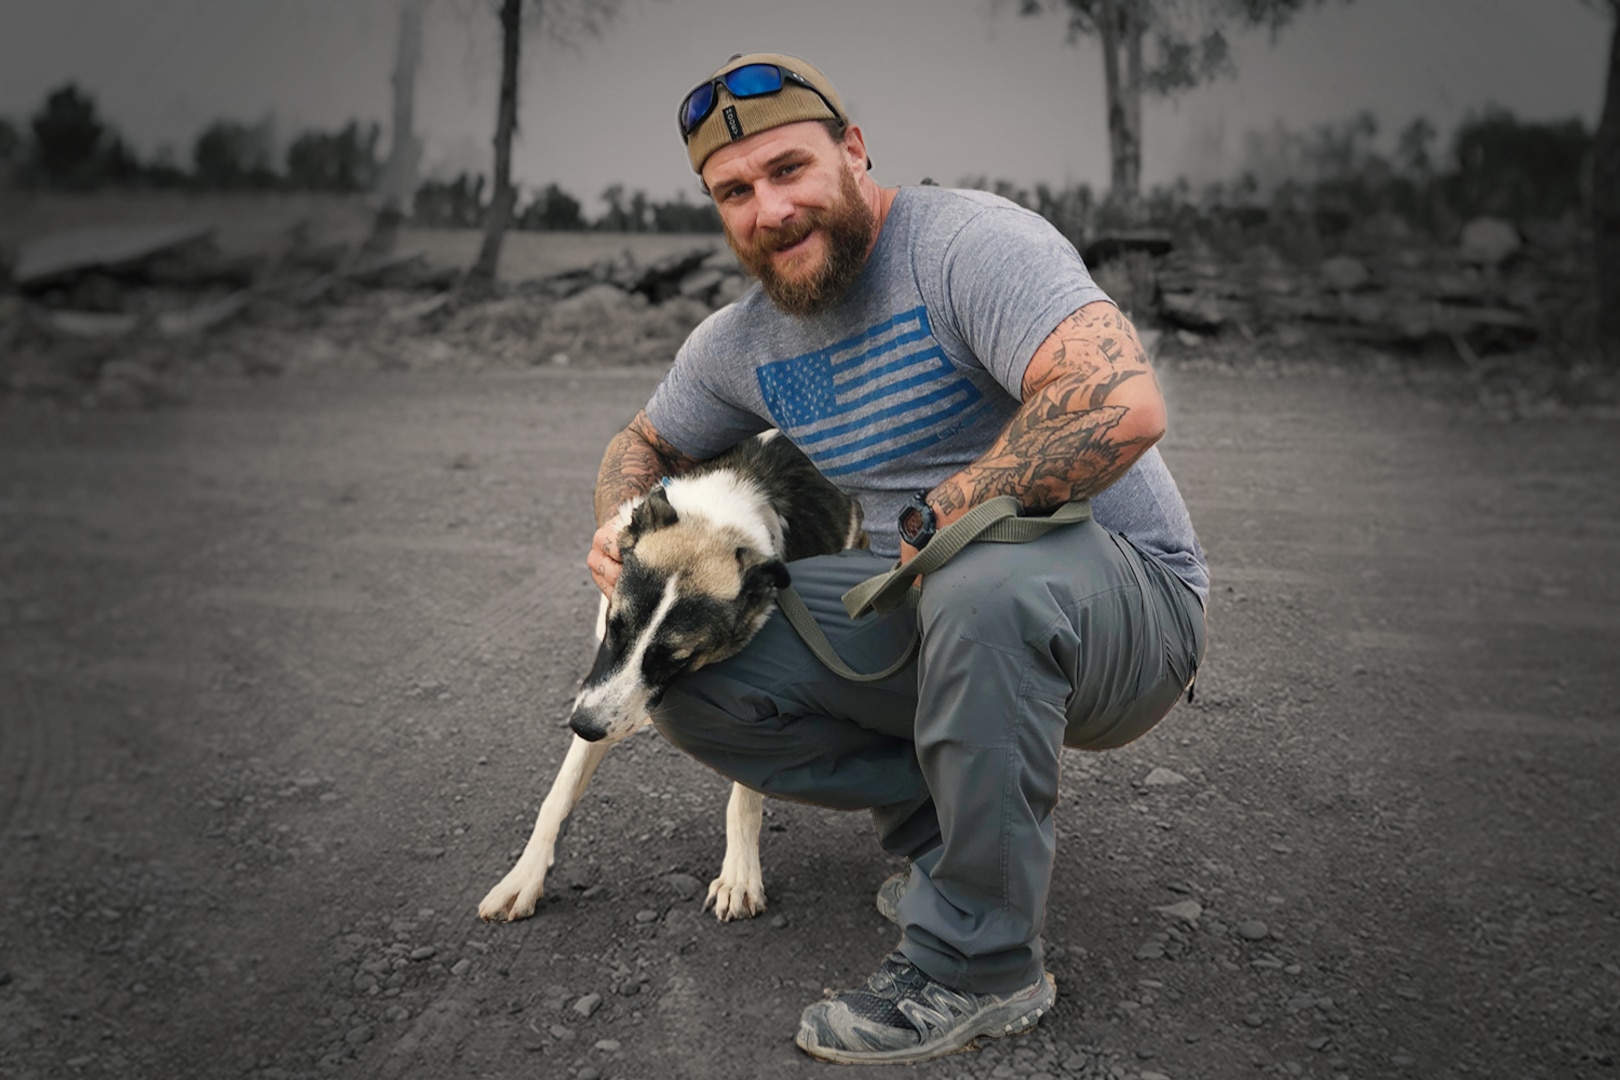 Scott A. Wirtz poses for a photo with Stewie while deployed in August 2018. (Photo illustration by Alex Gikas, DIA Public Affairs)